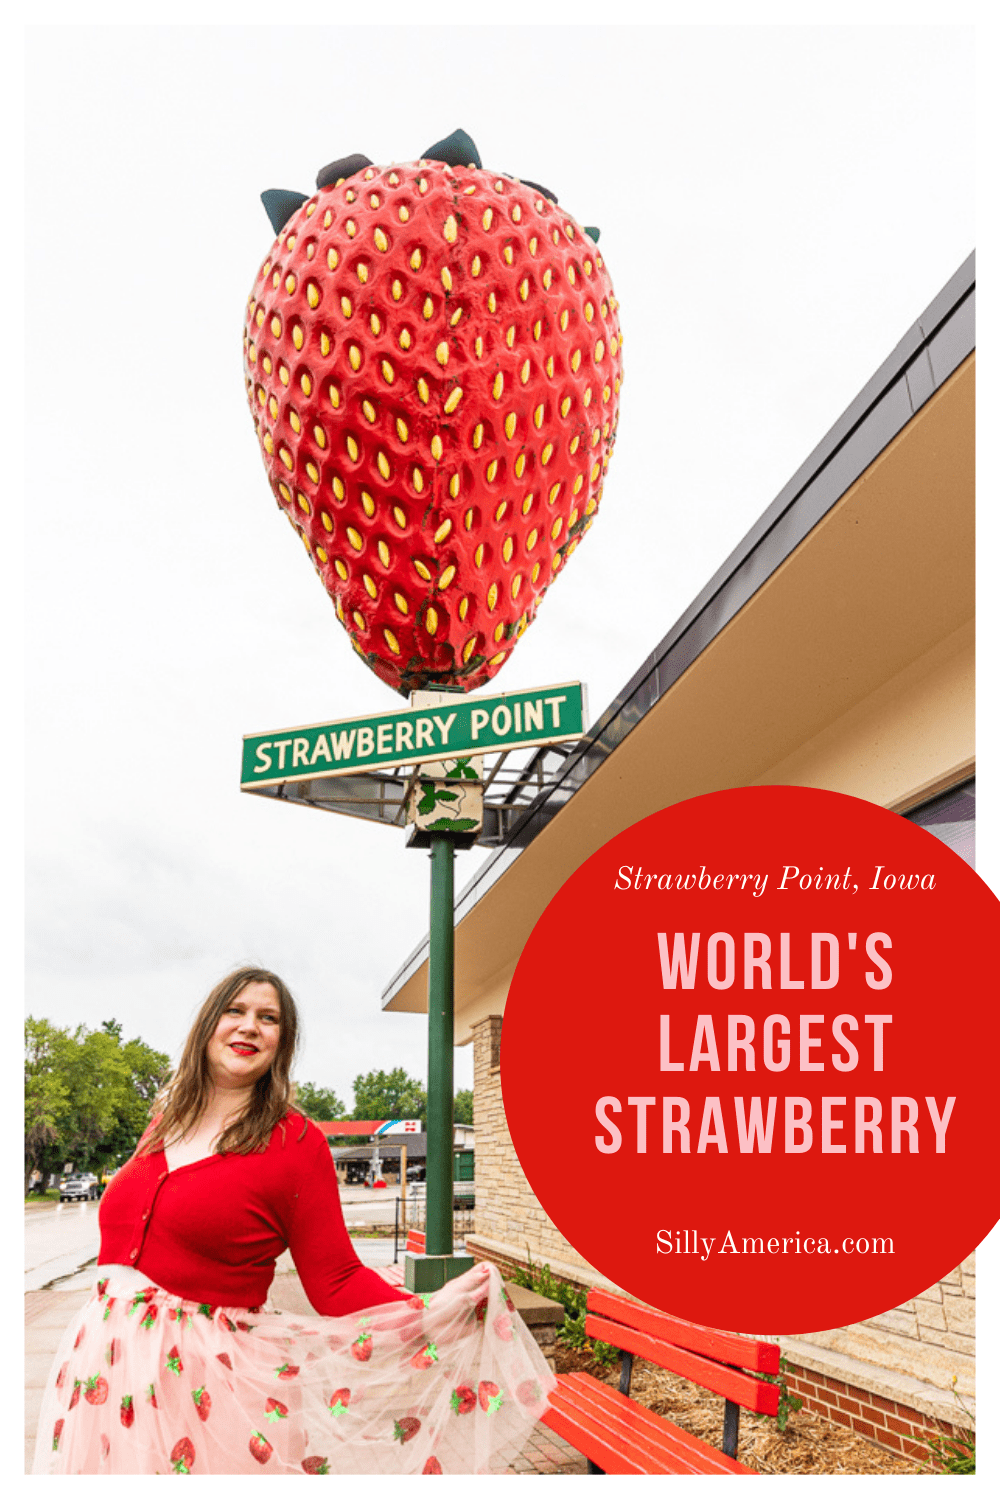 I love this Iowa roadside attraction BERRY much — and I hope you do too. It’s the world’s largest strawberry in Strawberry Point, Iowa. Stop at this giant berry on an Iowa road trip. It's a road trip stop you can't miss! #IowaRoadsideAttractions #IowaRoadsideAttraction #RoadsideAttractions #RoadsideAttraction #RoadTrip #IowaRoadTrip #IowaThingsToDo #IowaRoadTripBucketLists #IowaBucketList #IowaRoadTripIdeas #IowaWaterfallsRoadTrip #IowaTravel #strawberry